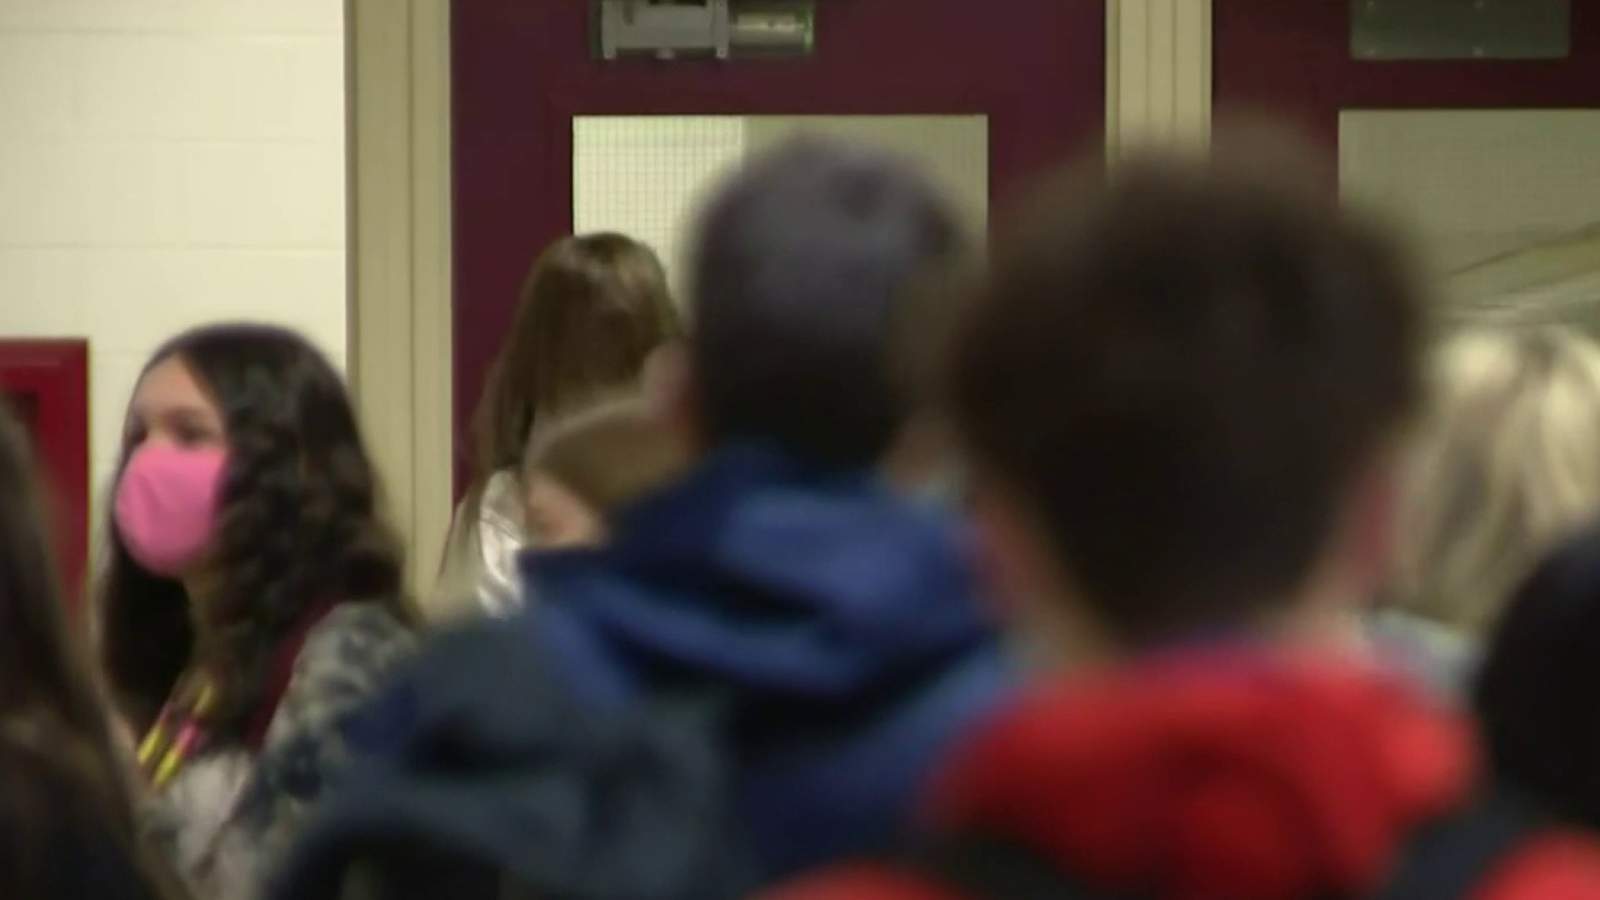 Some Michigan schools going forward with SAT, ACT testing; others will use make-up days